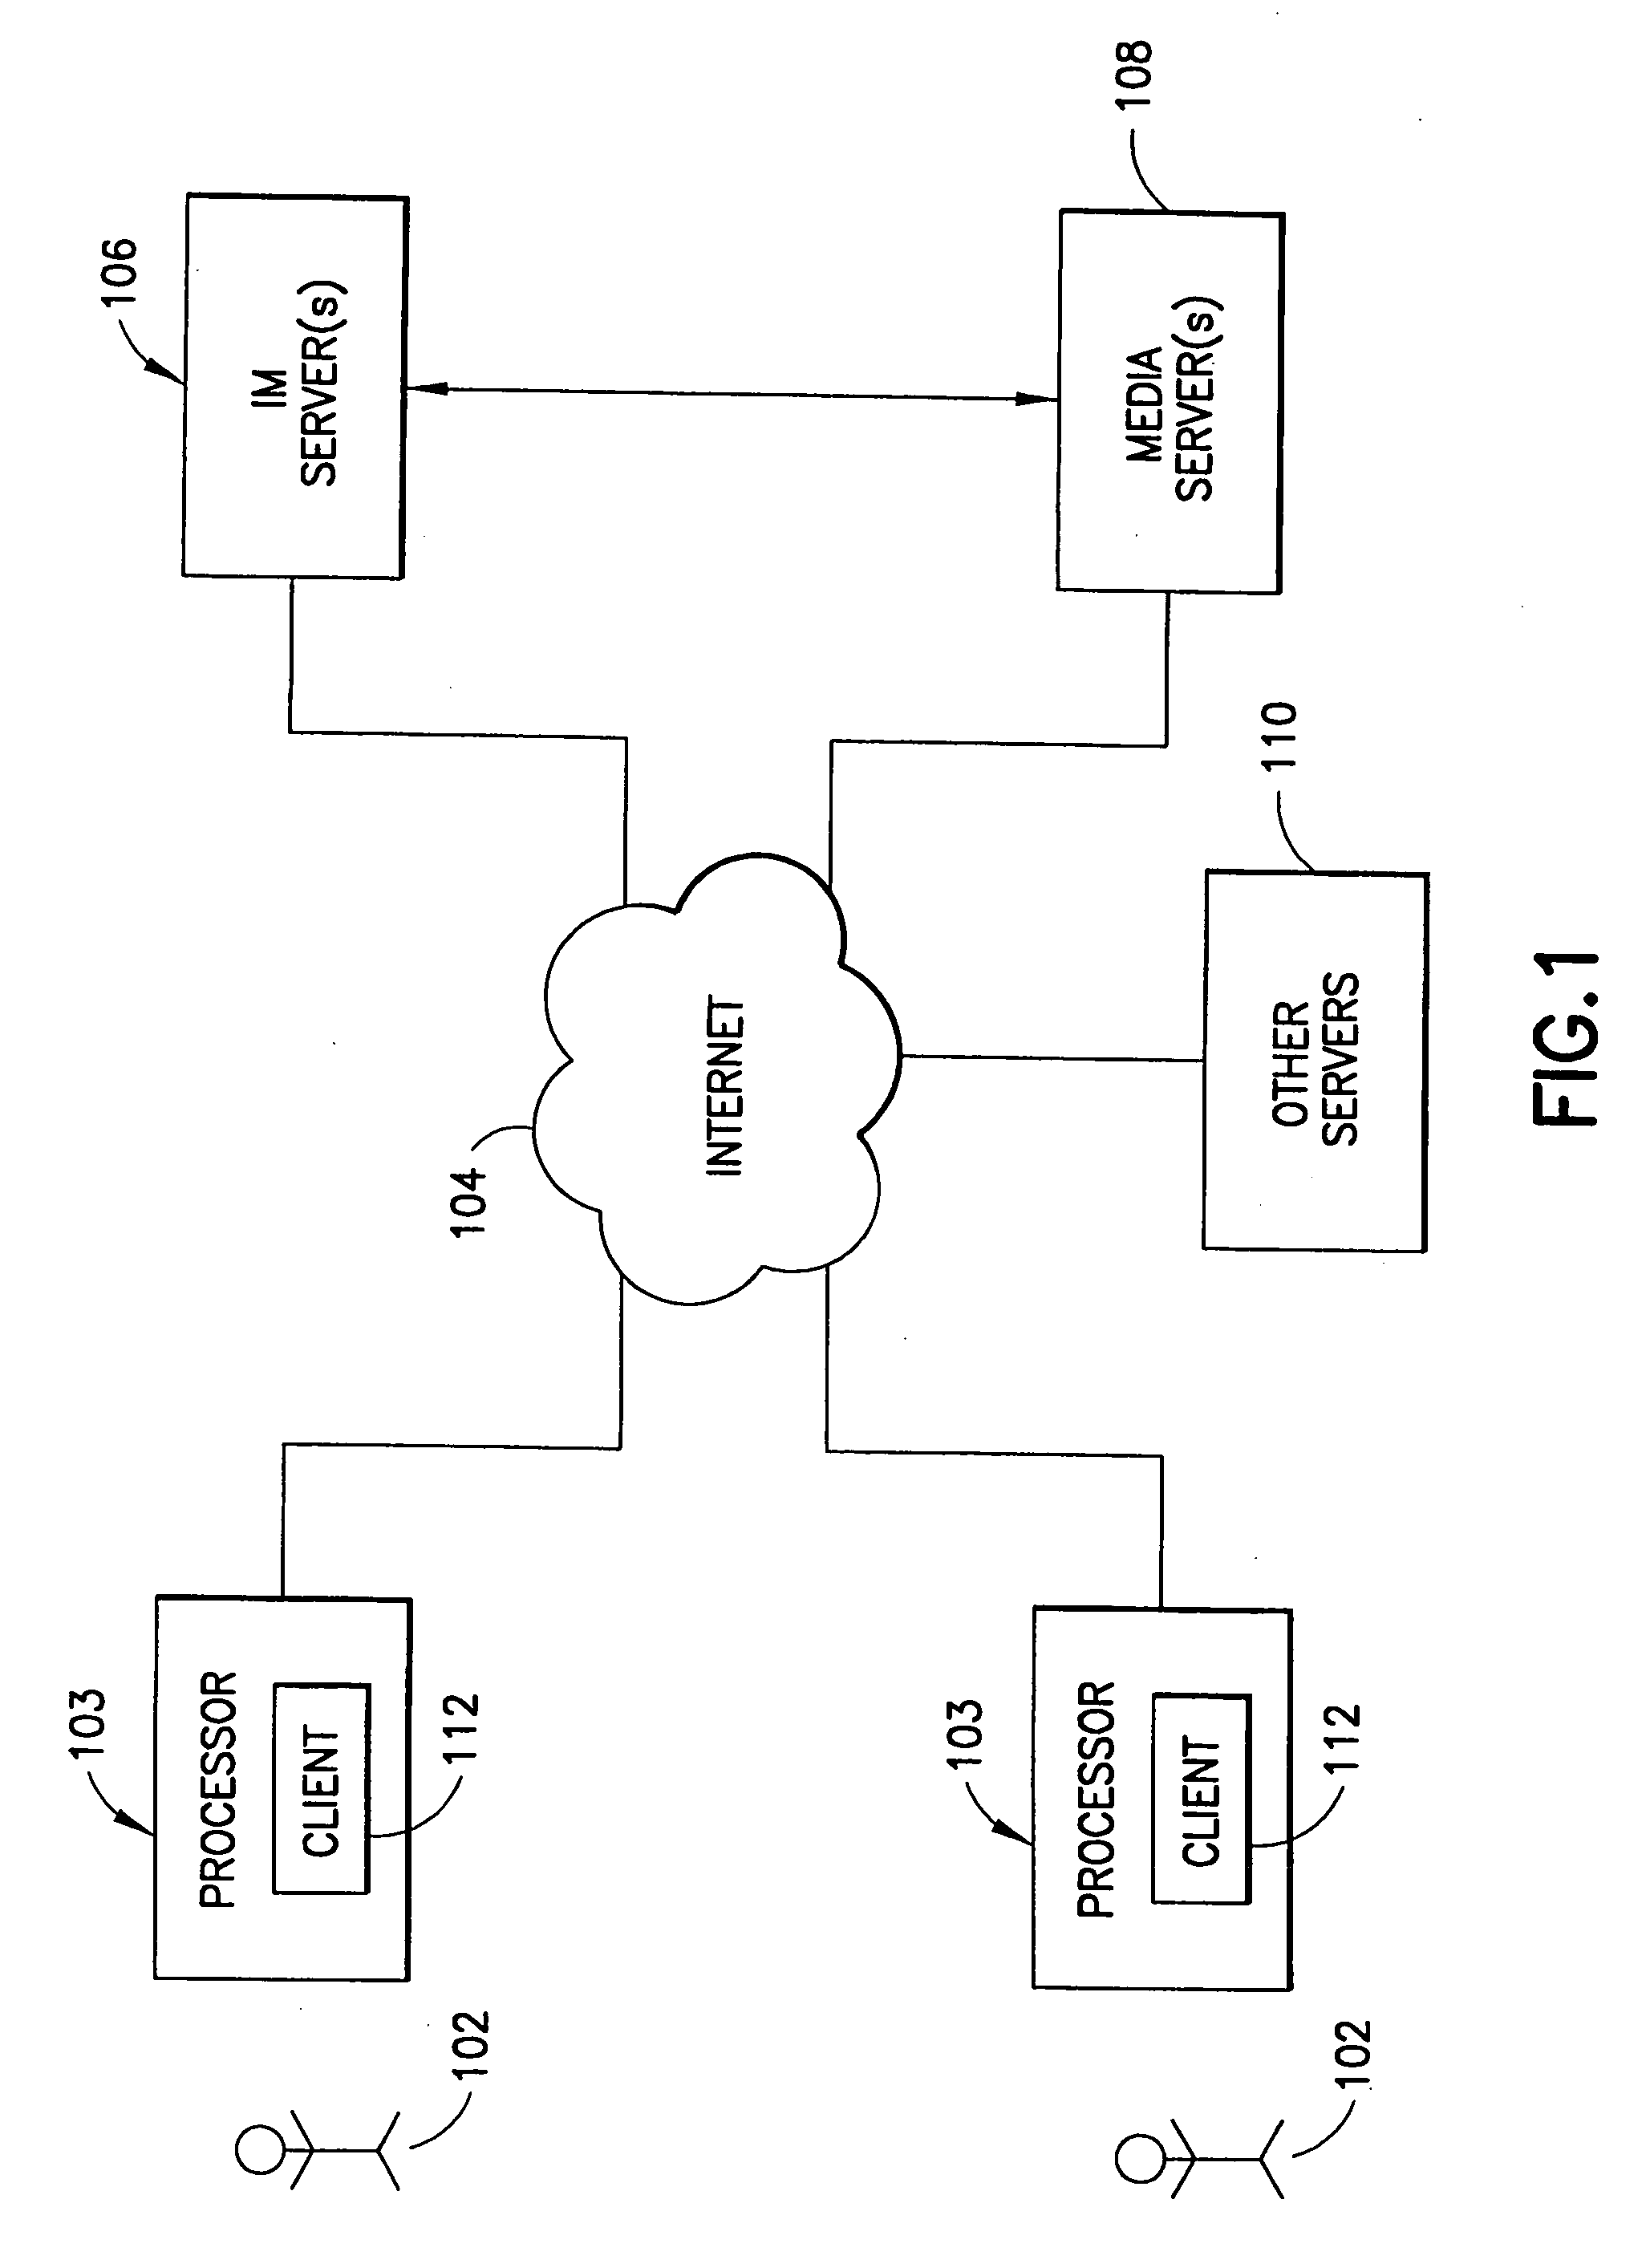 System and method for enhanced messaging and commerce